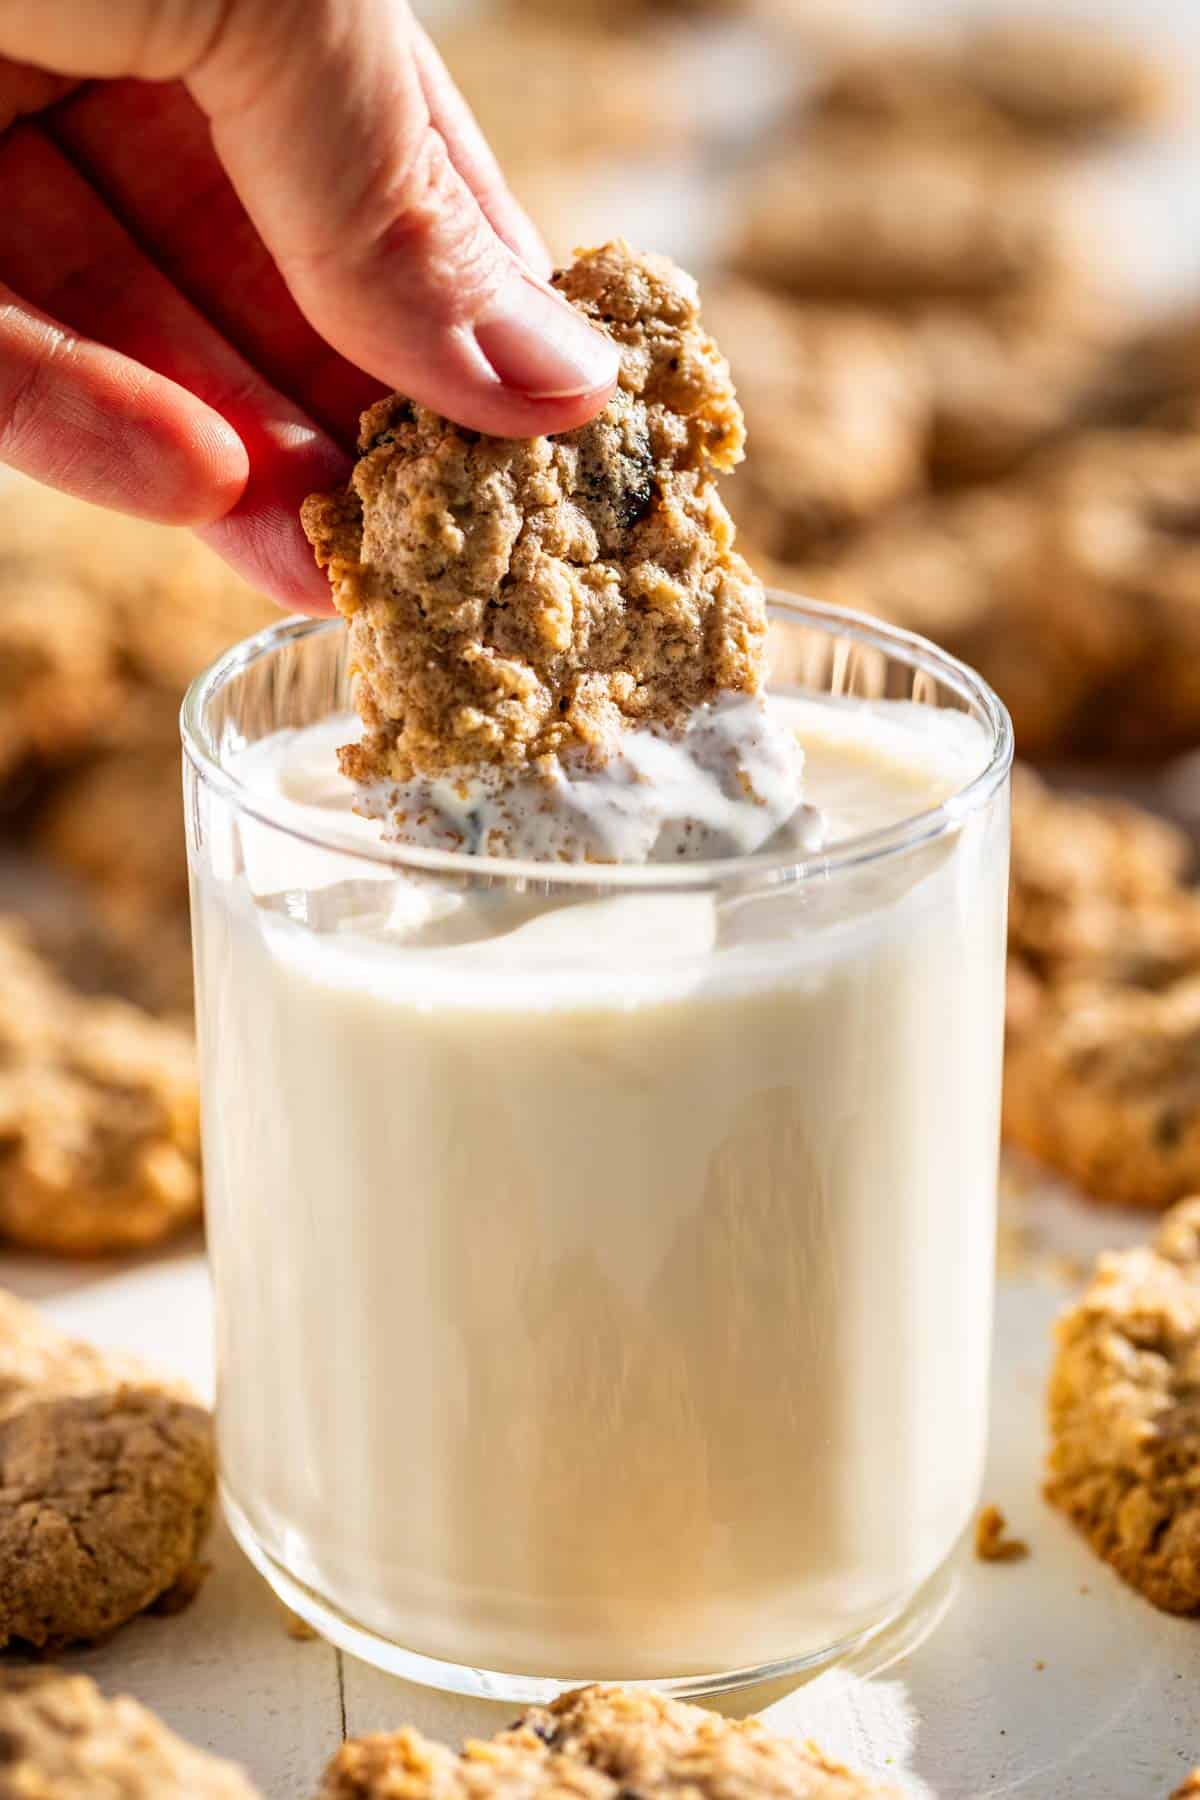 A hand dunking 1/2 of a Oatmeal Raisin Cookie into a glass of milk with cookies around the glass.